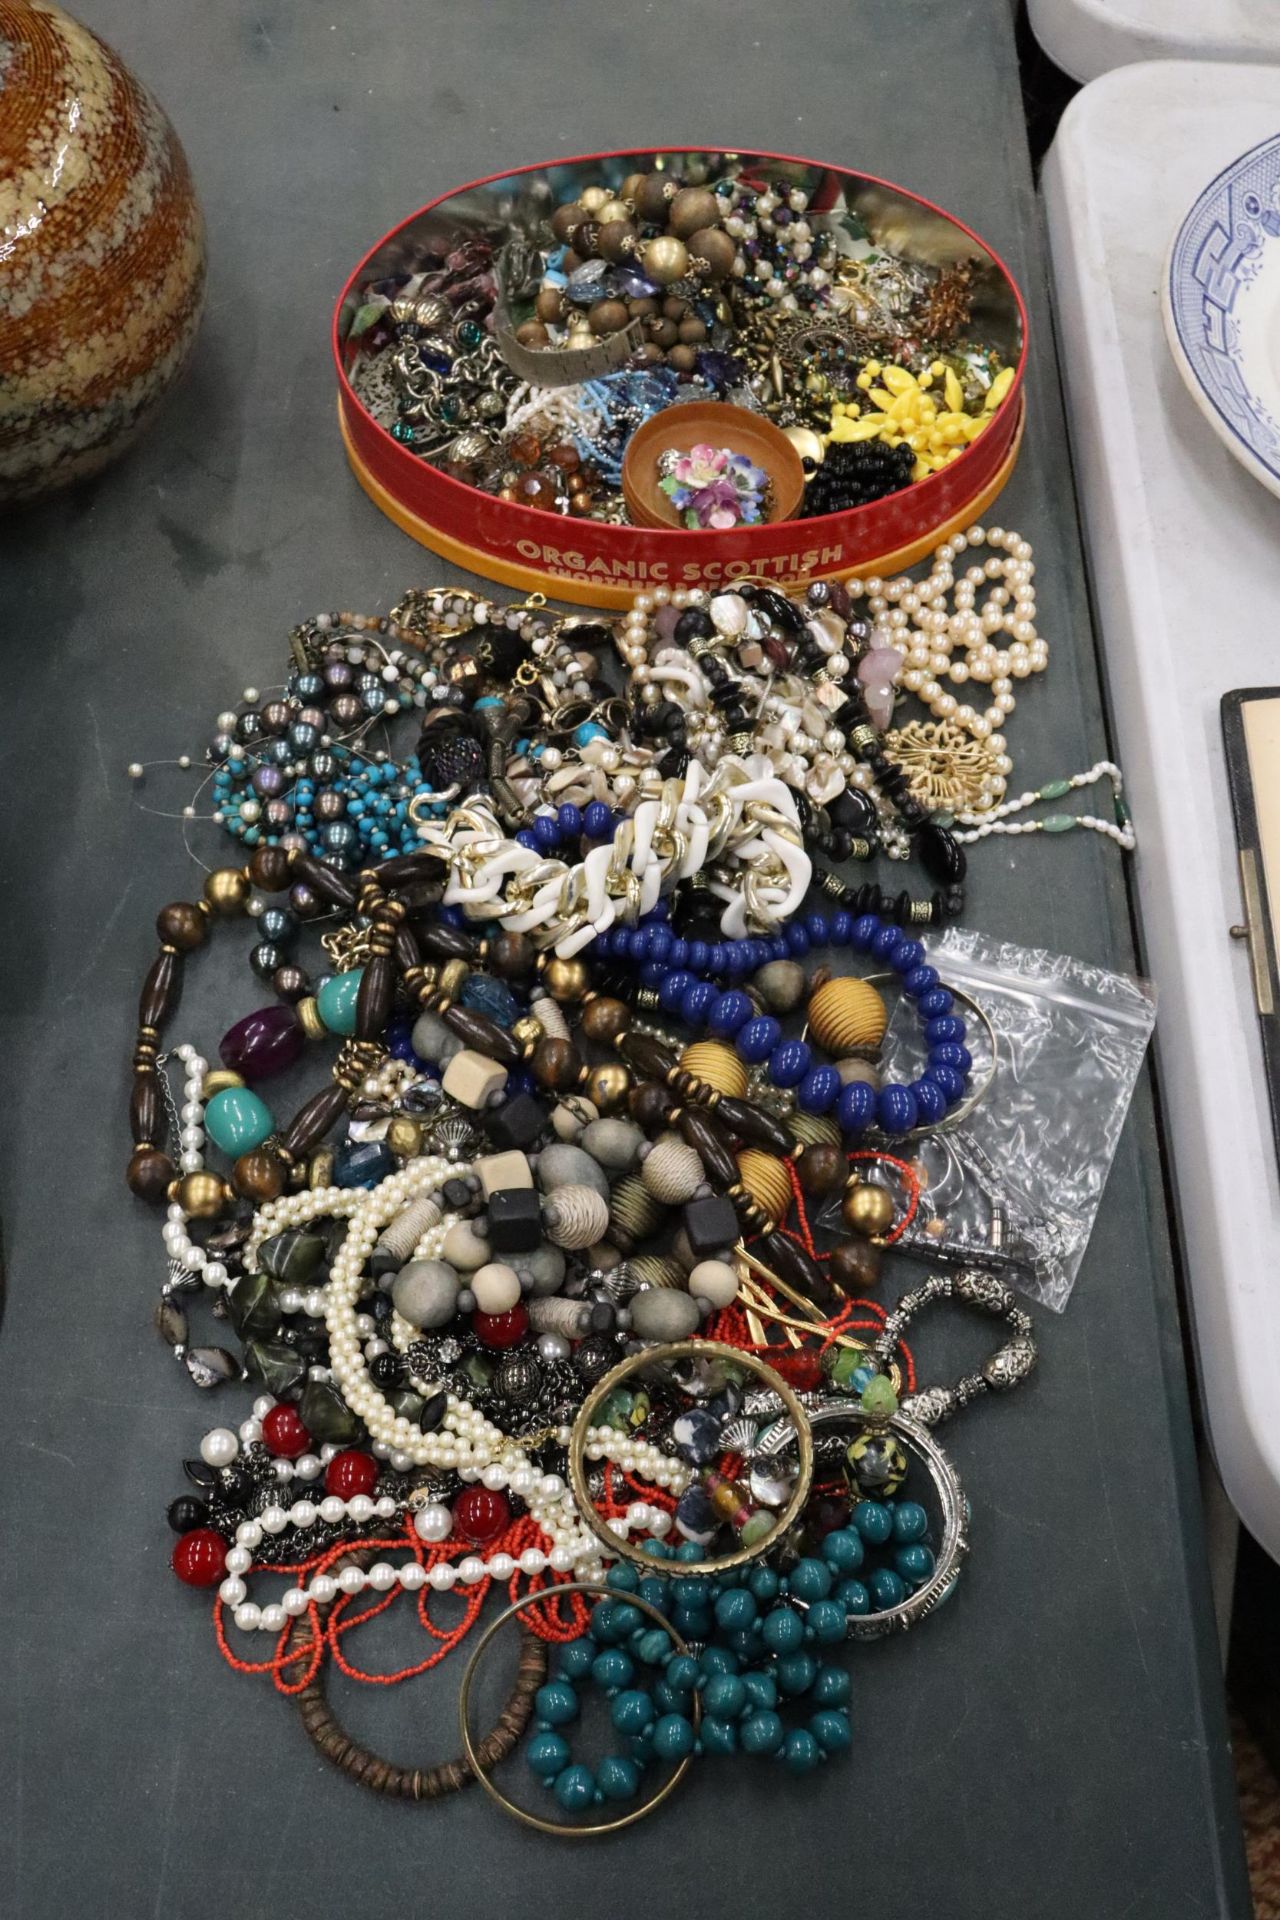 A LARGE QUANTITY OF COSTUME JEWELLERY TO INCLUDE BEADS, NECKLACES, BROOCHES, EARRINGS, ETC